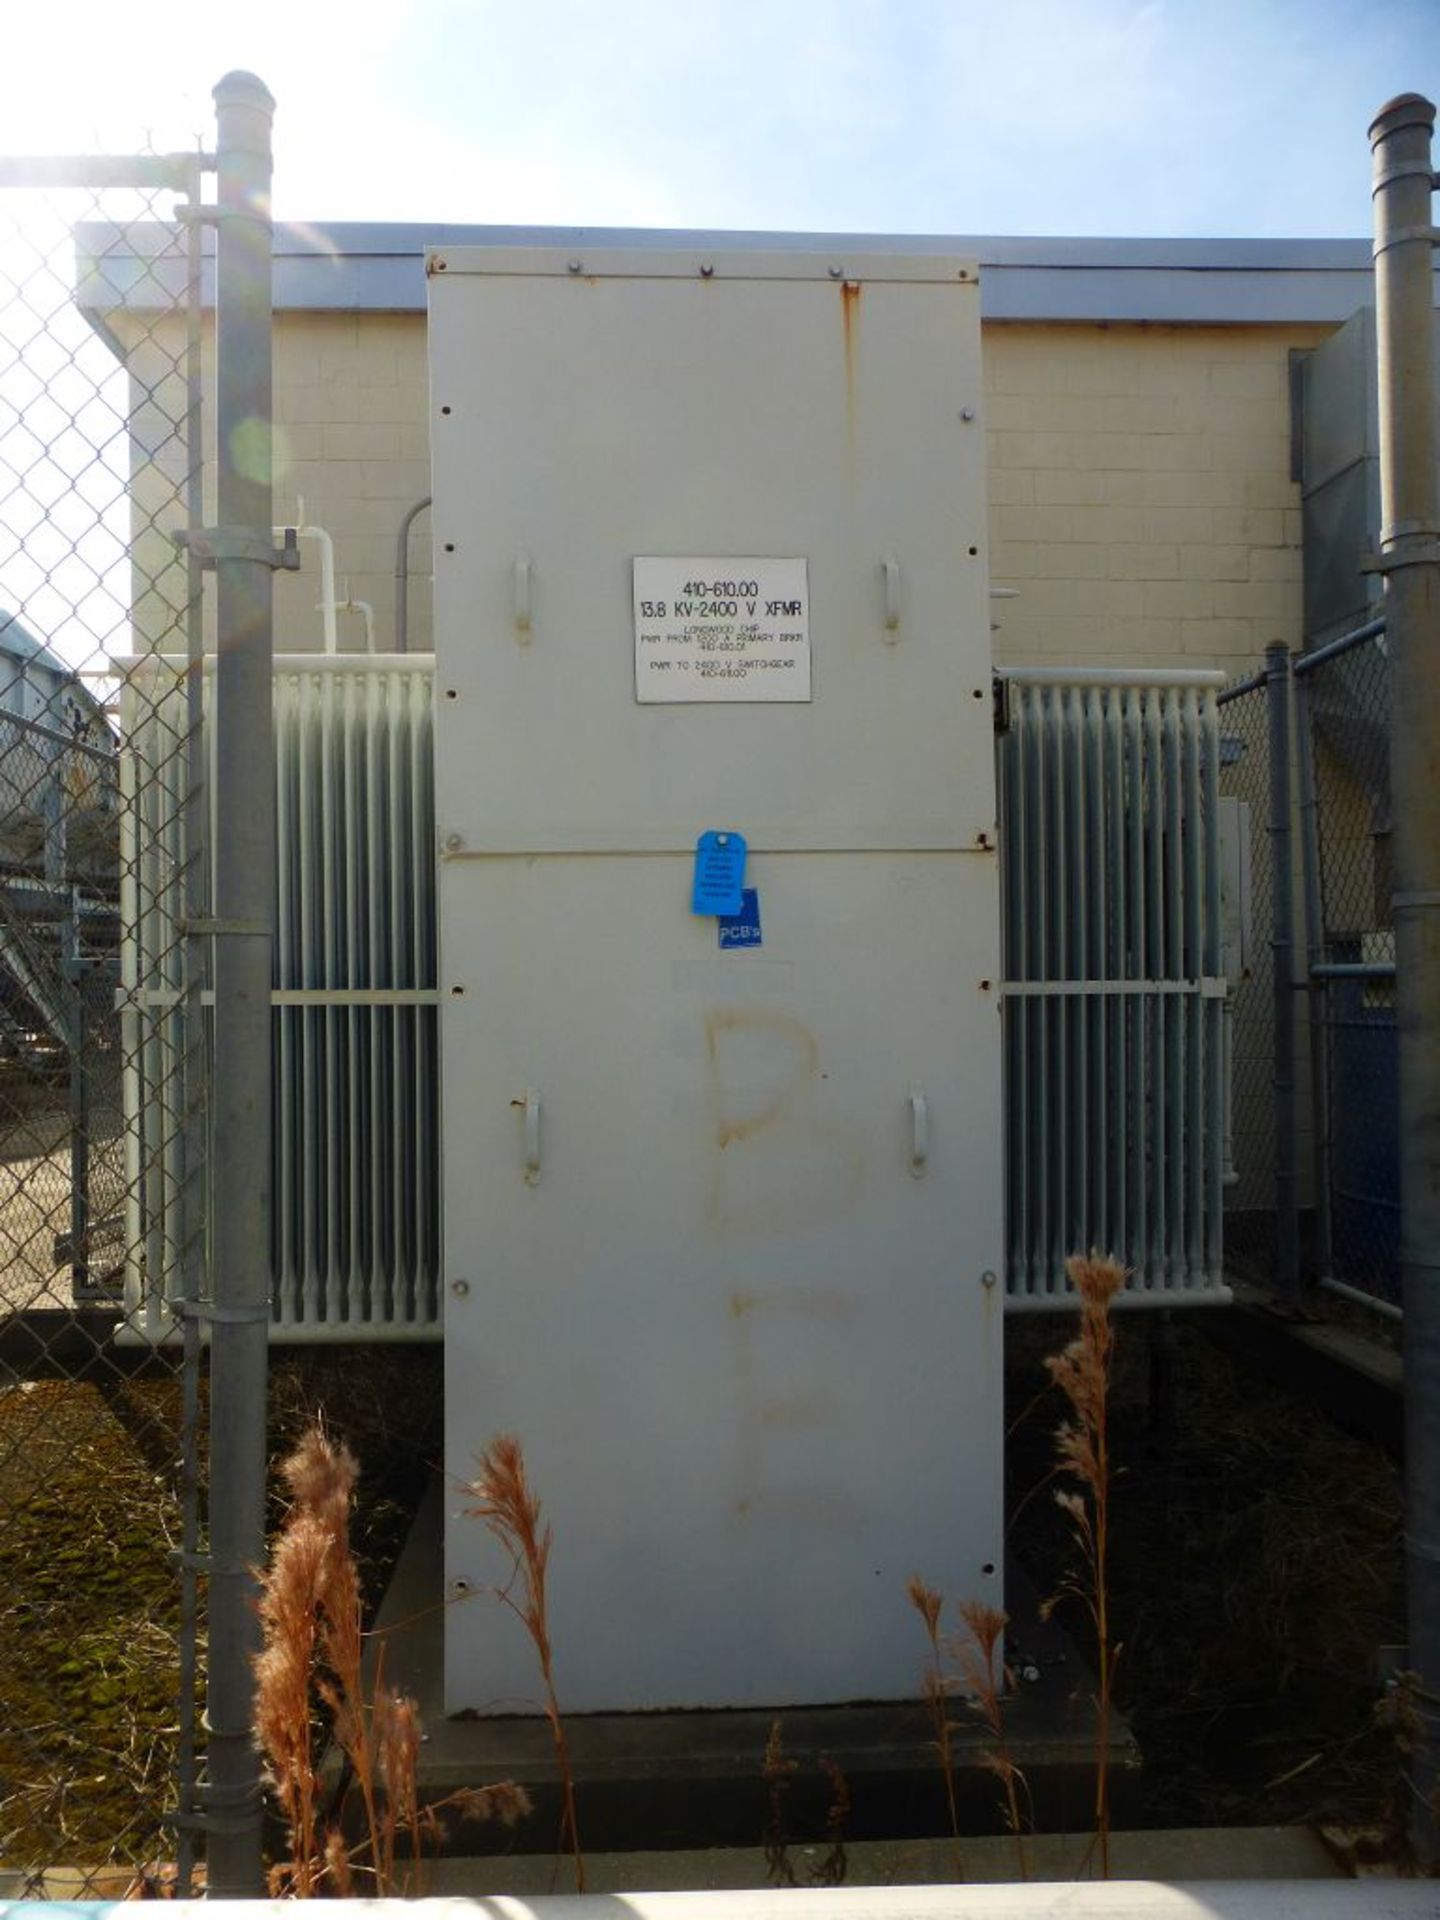 GE Transformer - Removed from Service January 2022 | 3750 KVA; 13800-2400Y/1385; Tag: 230472 | Lot - Image 4 of 10